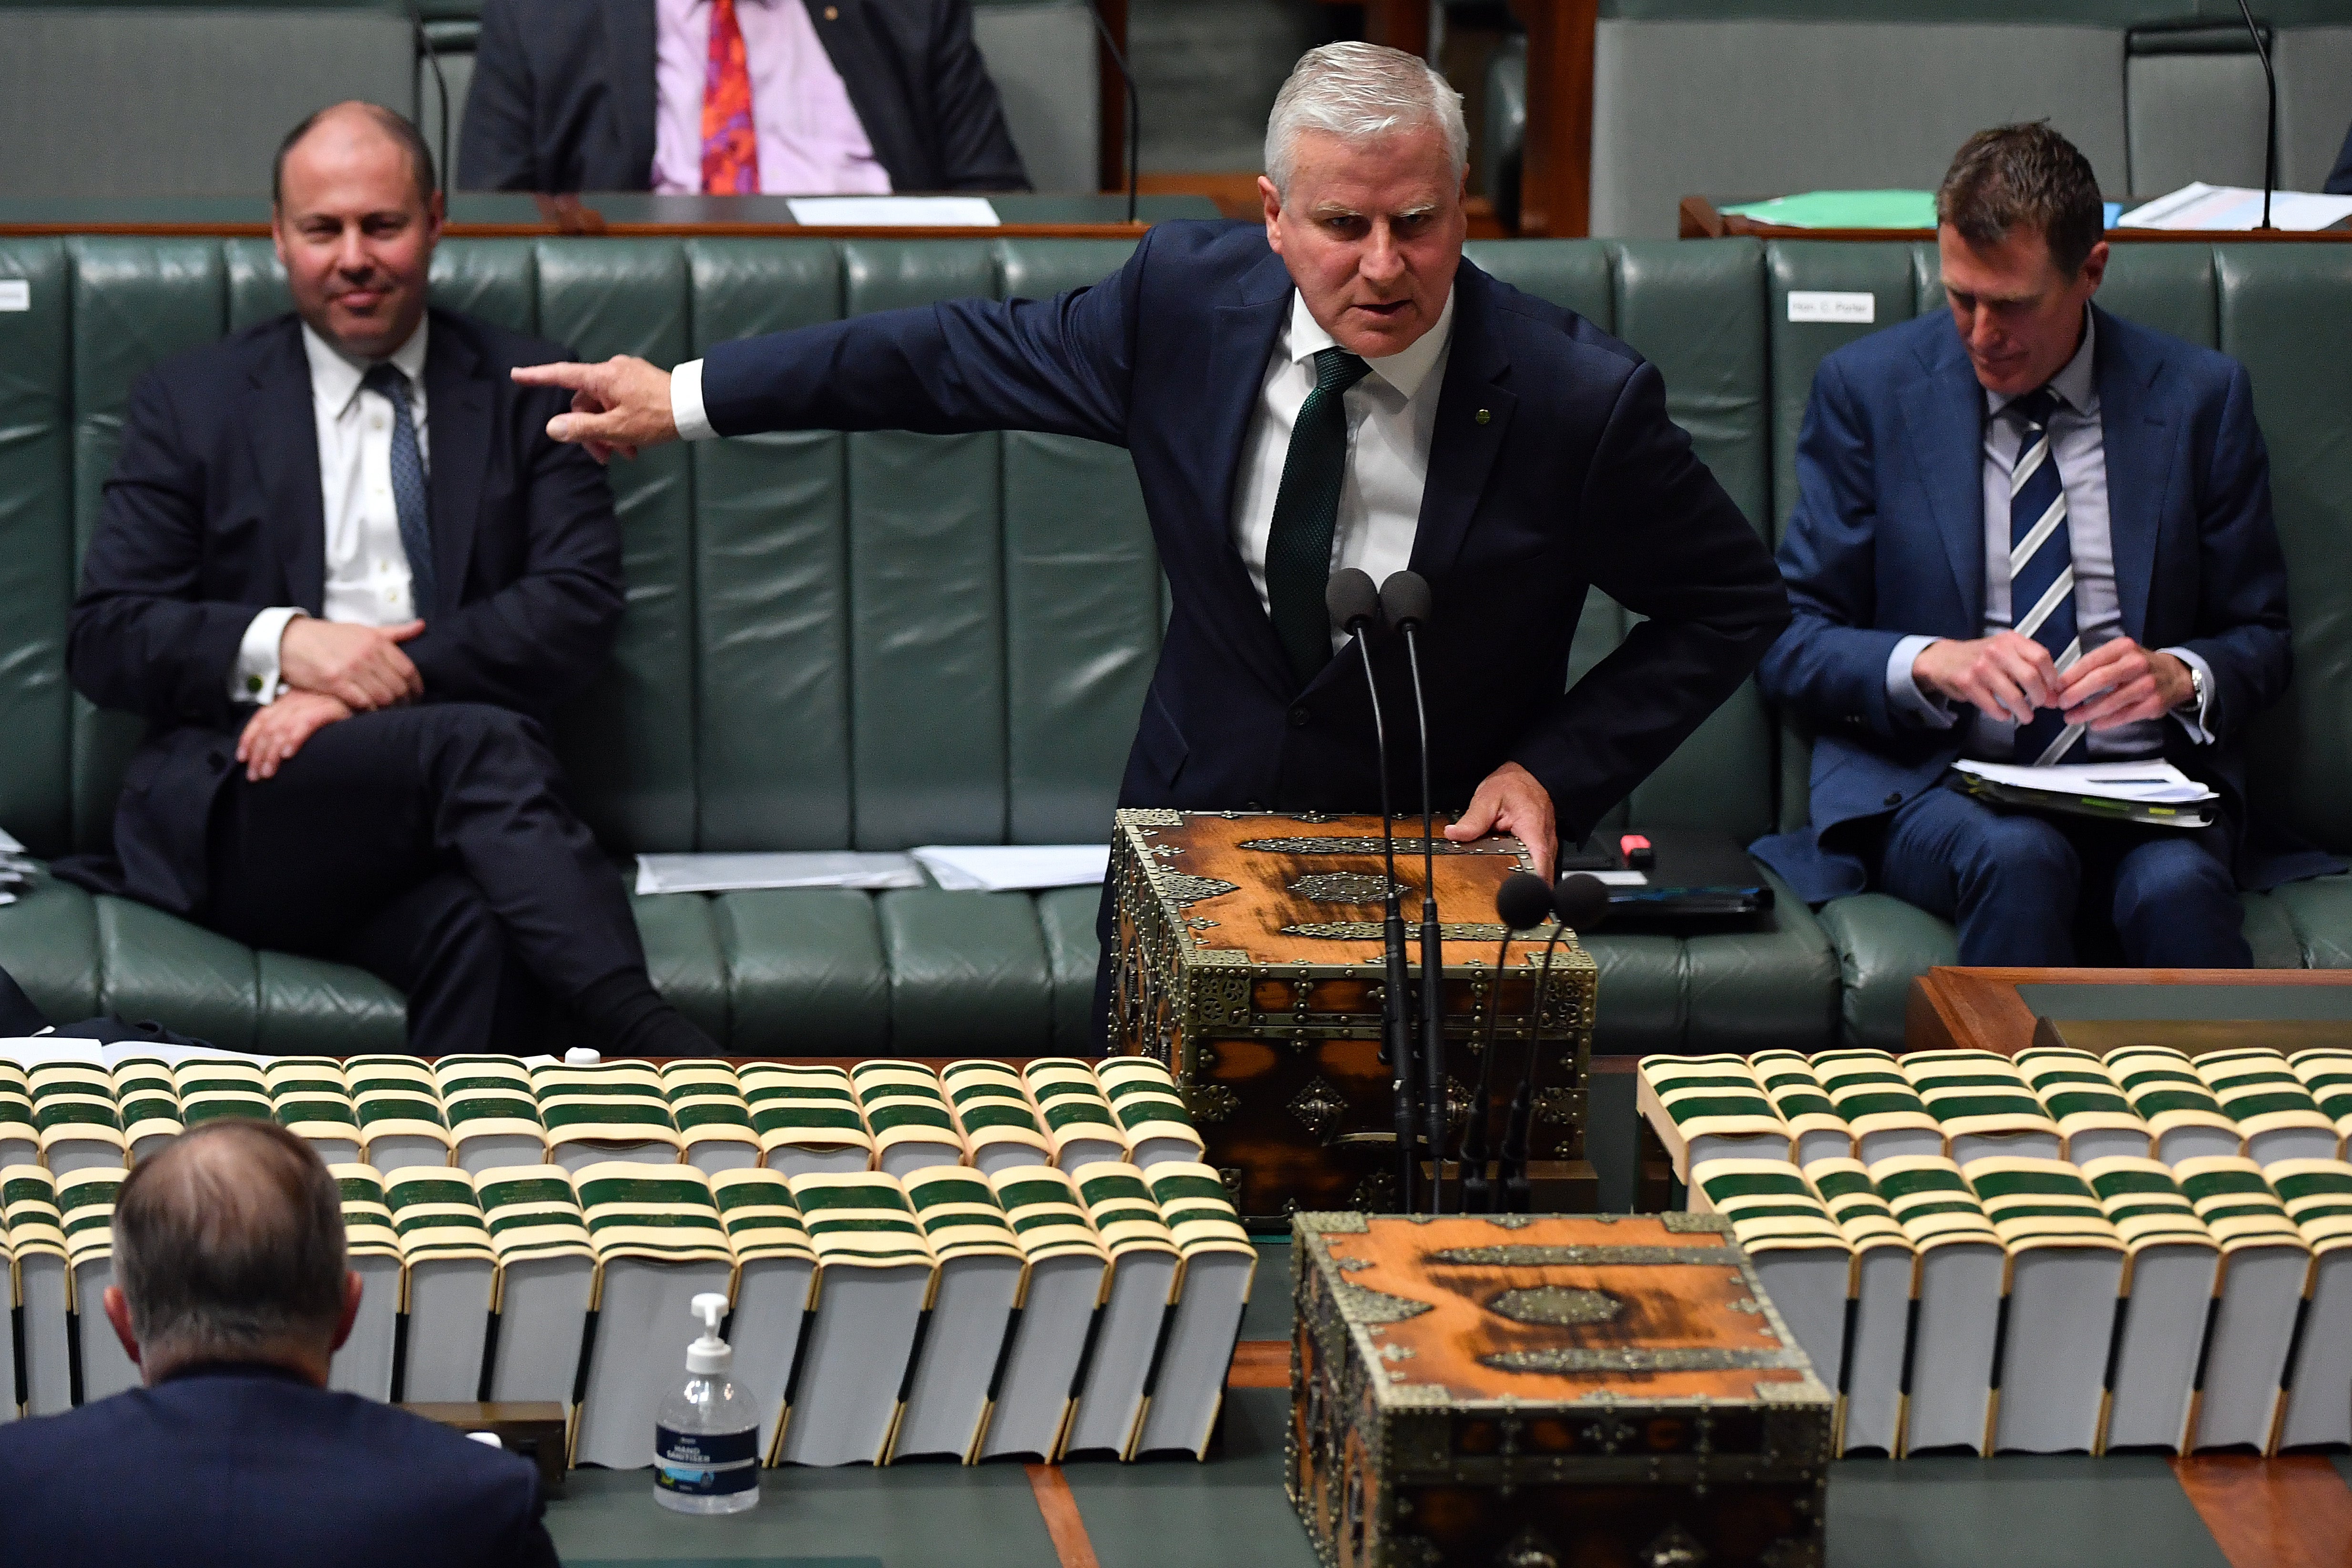 File image: McCormack, who is serving as acting prime minister during a week-long absence for Scott Morrison, calls the US Capitol riots ‘unfortunate’